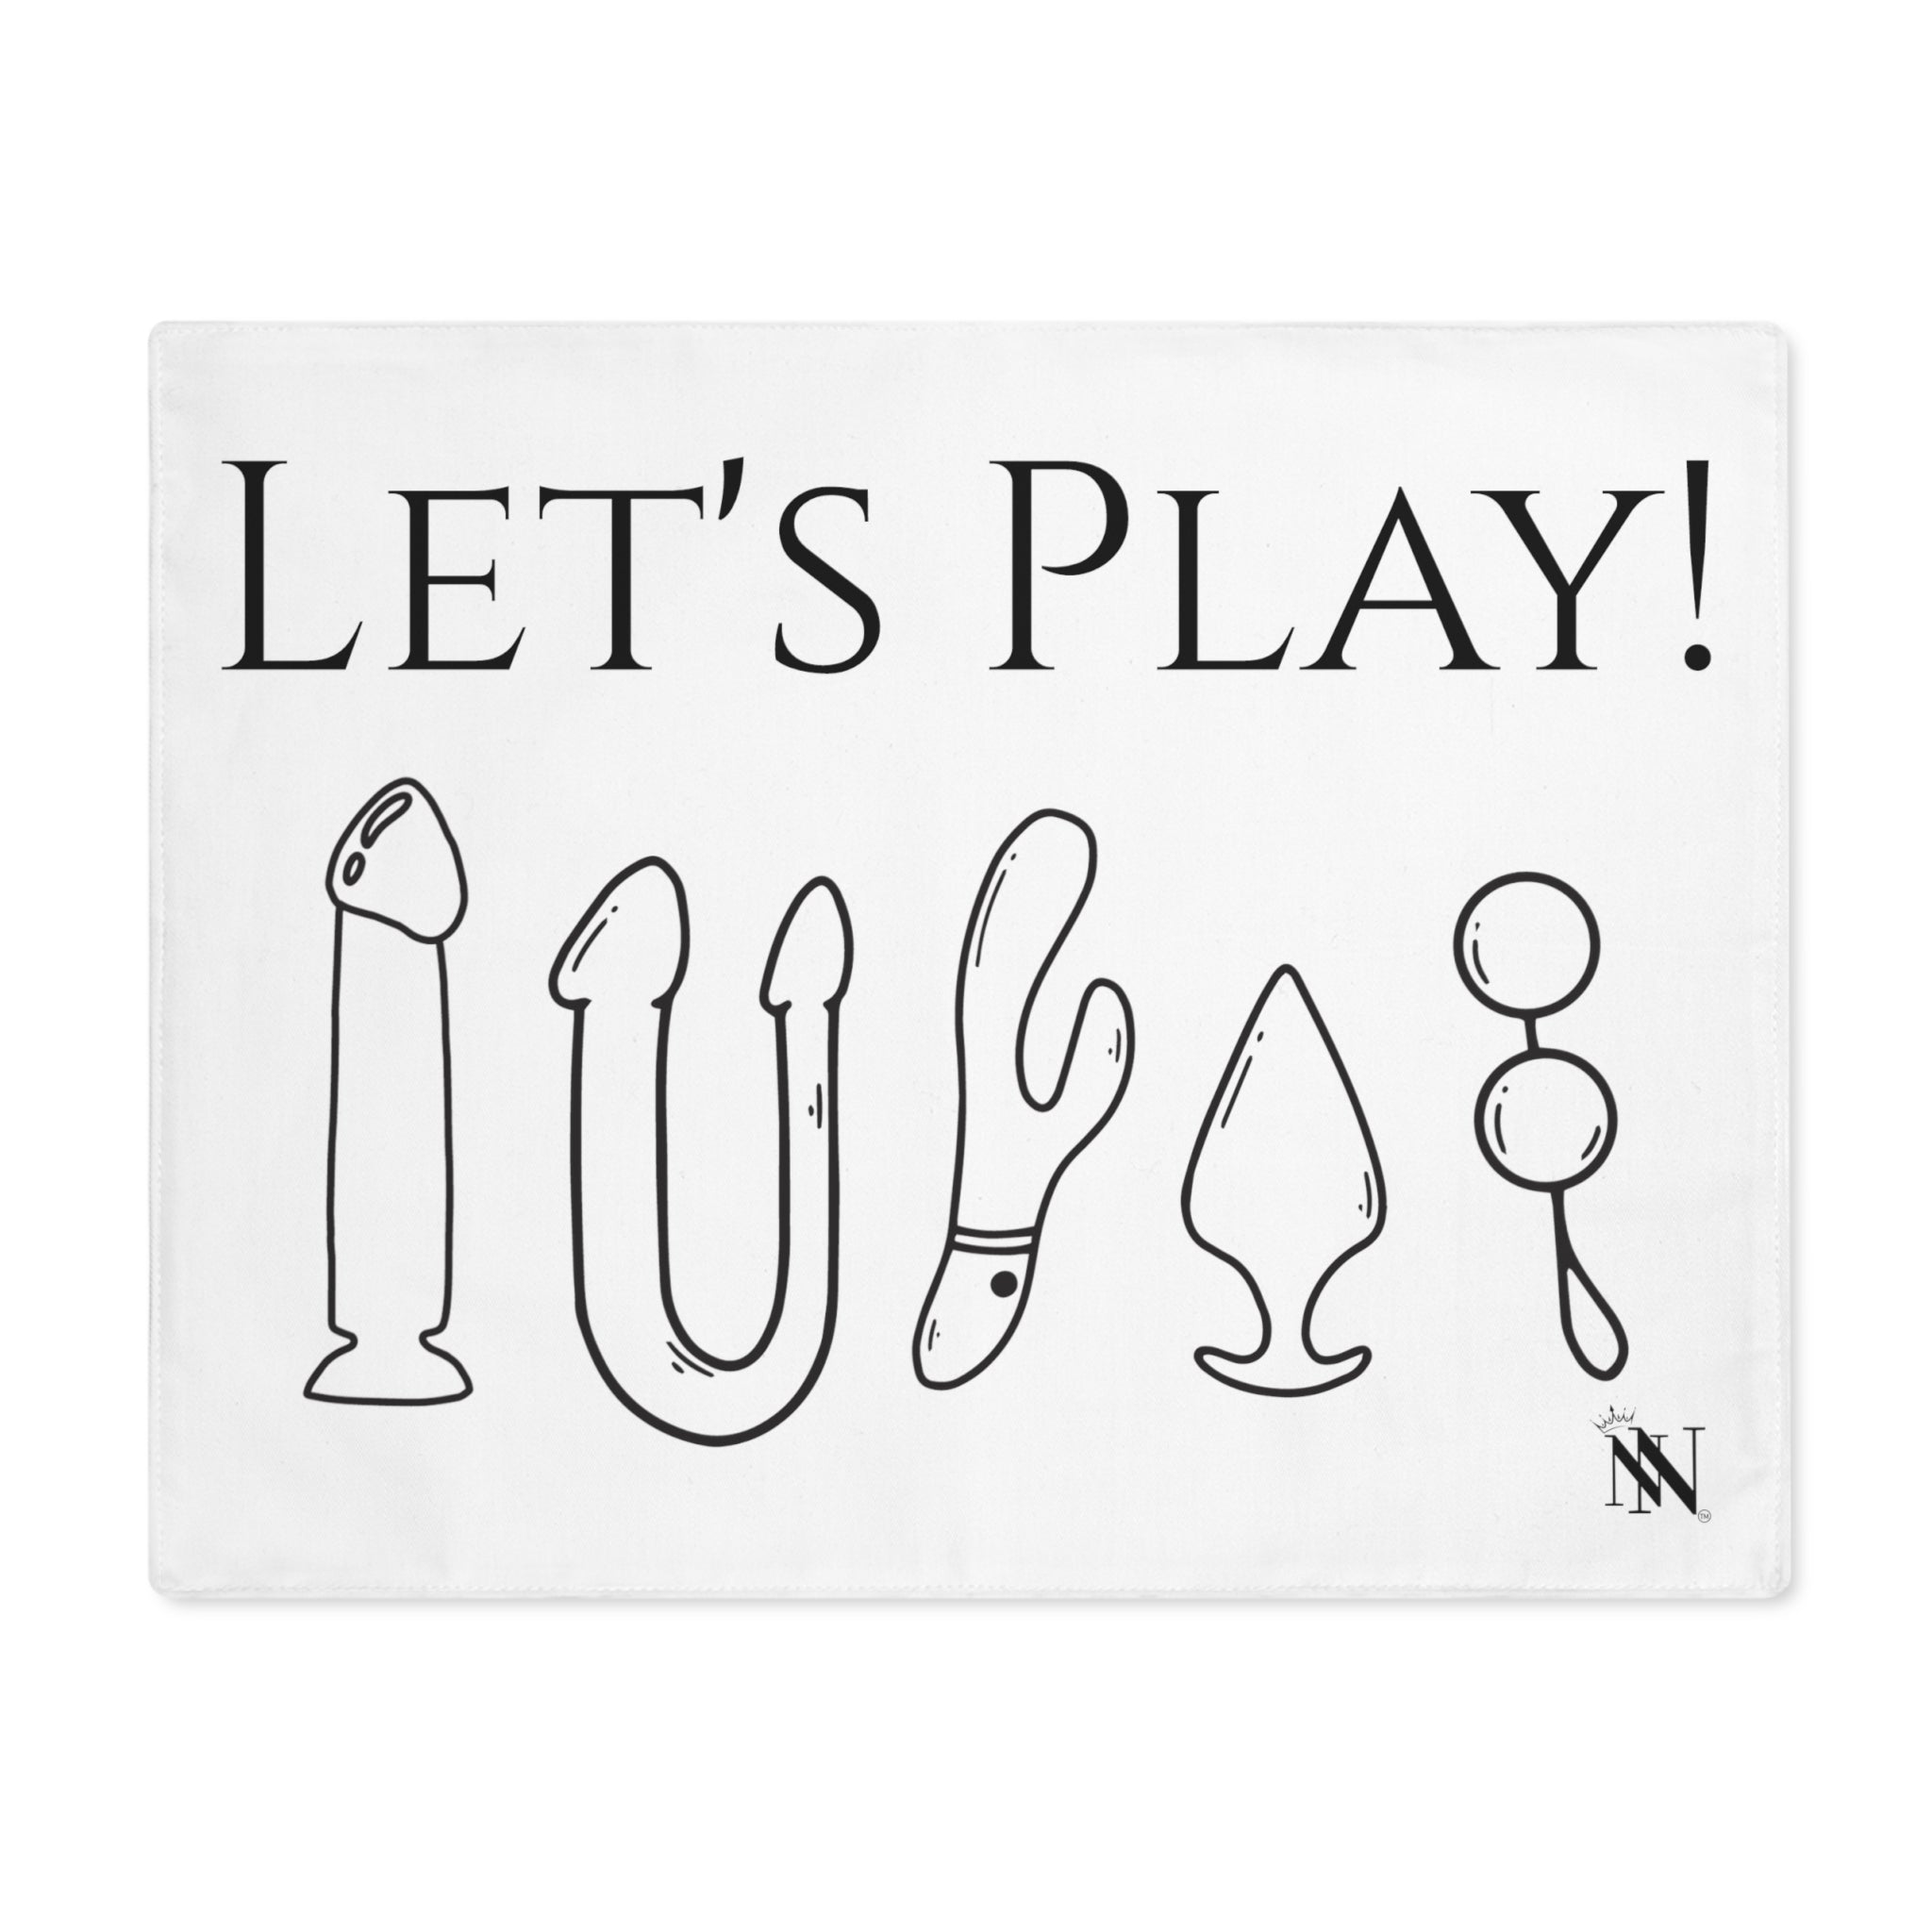 Let's Play WW Sexy Gifts for Boyfriend BF Wife Men Her Girlfriend Wife Divorce Funny Joke Humor Naughty Sex Cum Toy Mat First 2nd Anniversary Wedding Fiance Couple Valentines NECTAR NAPKINS